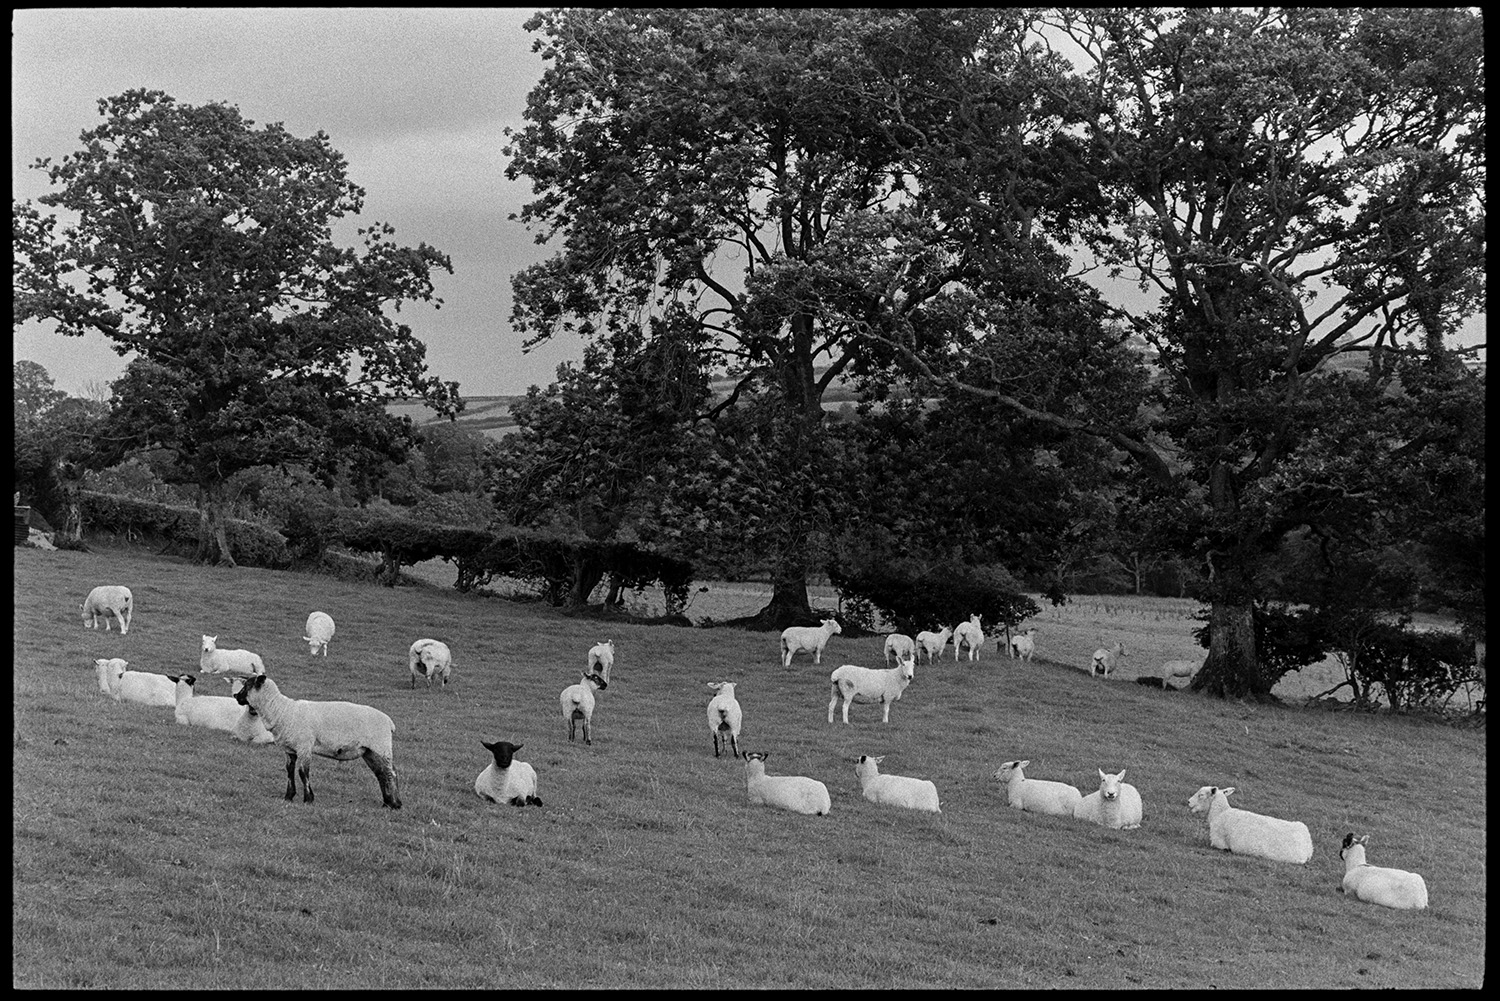 Sheep grazing in a field with trees at Upcott, Dolton. An old hedge with gaps can be seen in the background.